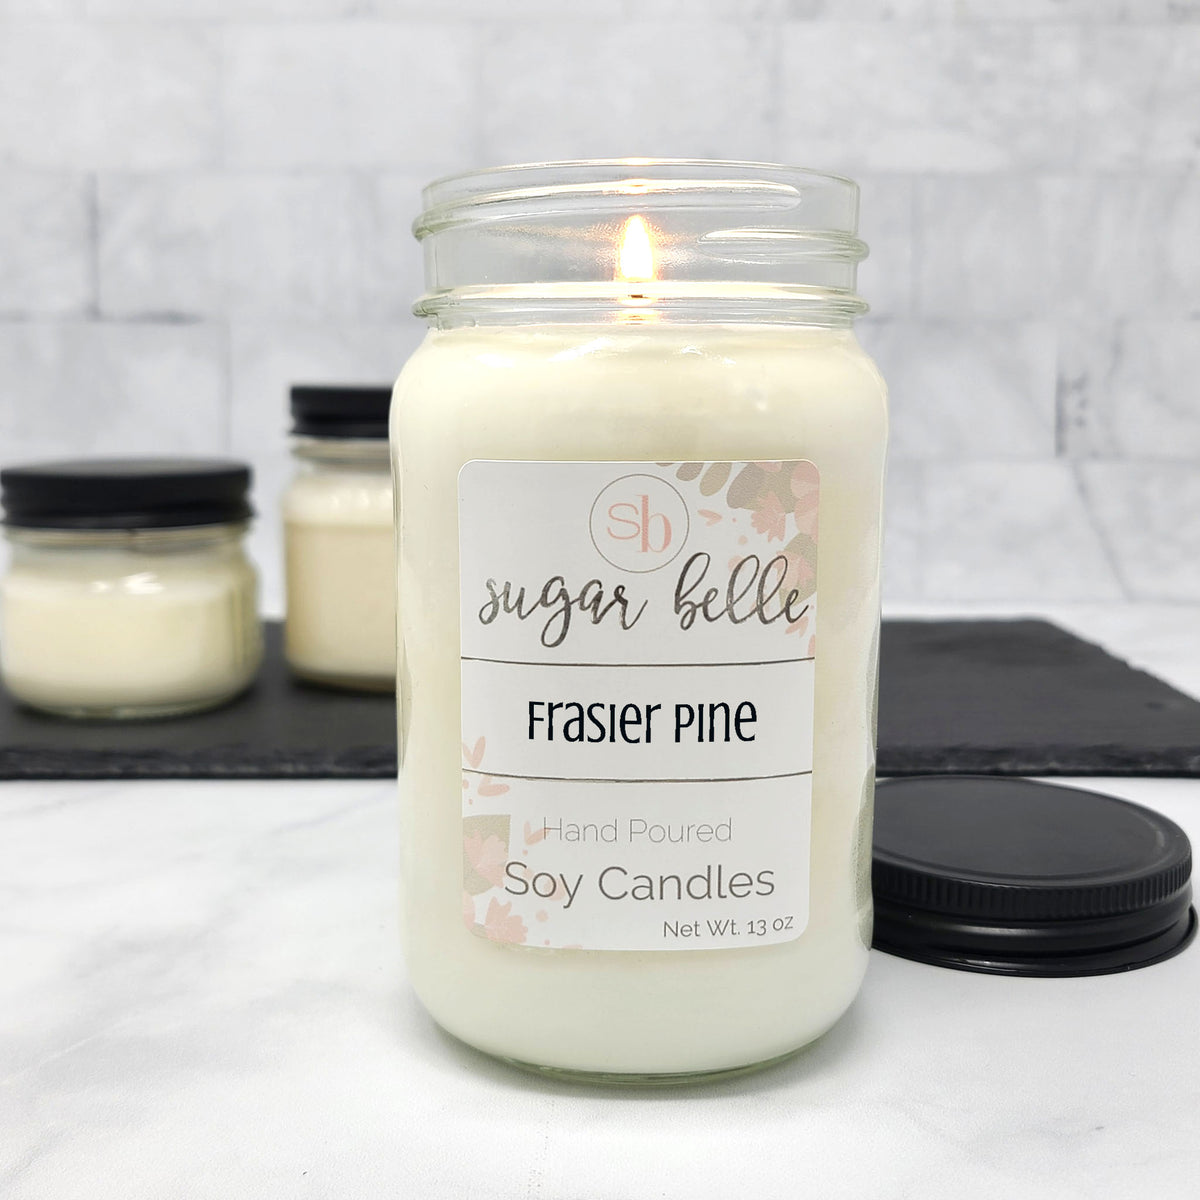 Frasier Pine Scented Soy Wax Melts  Small Batch. Hand Poured. – Sugar  Belle Candles